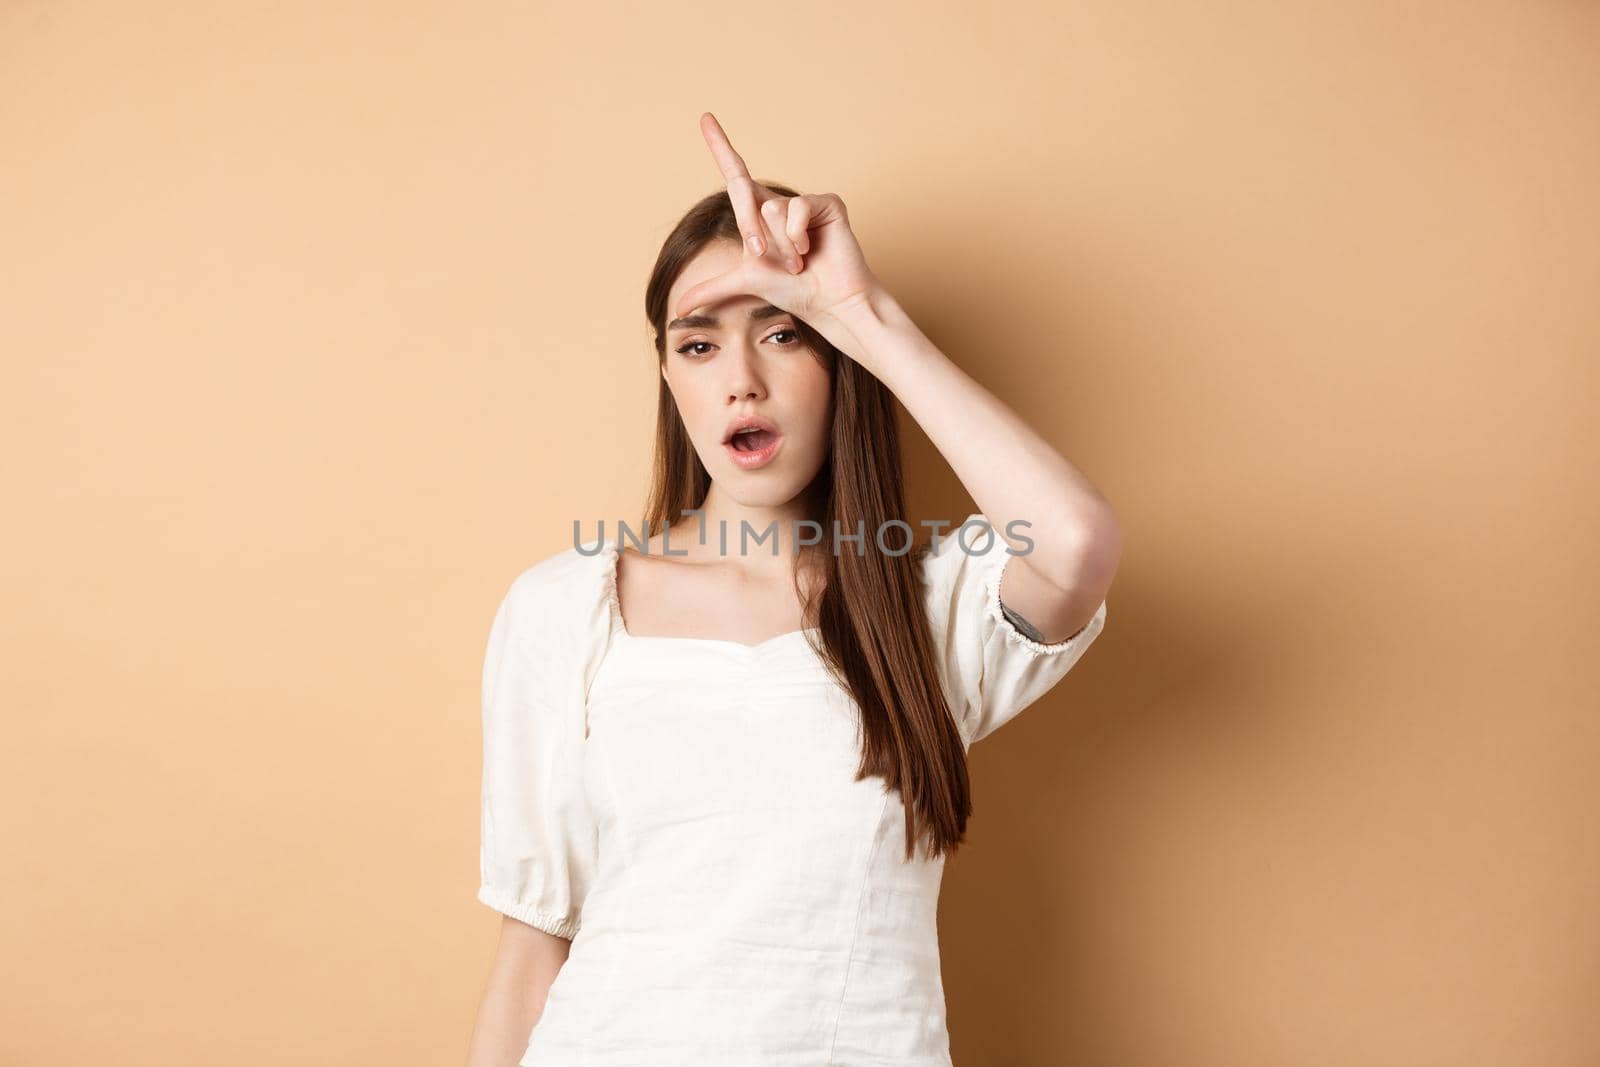 Confident woman mocking people with loser sign, being mean, standing on beige background.